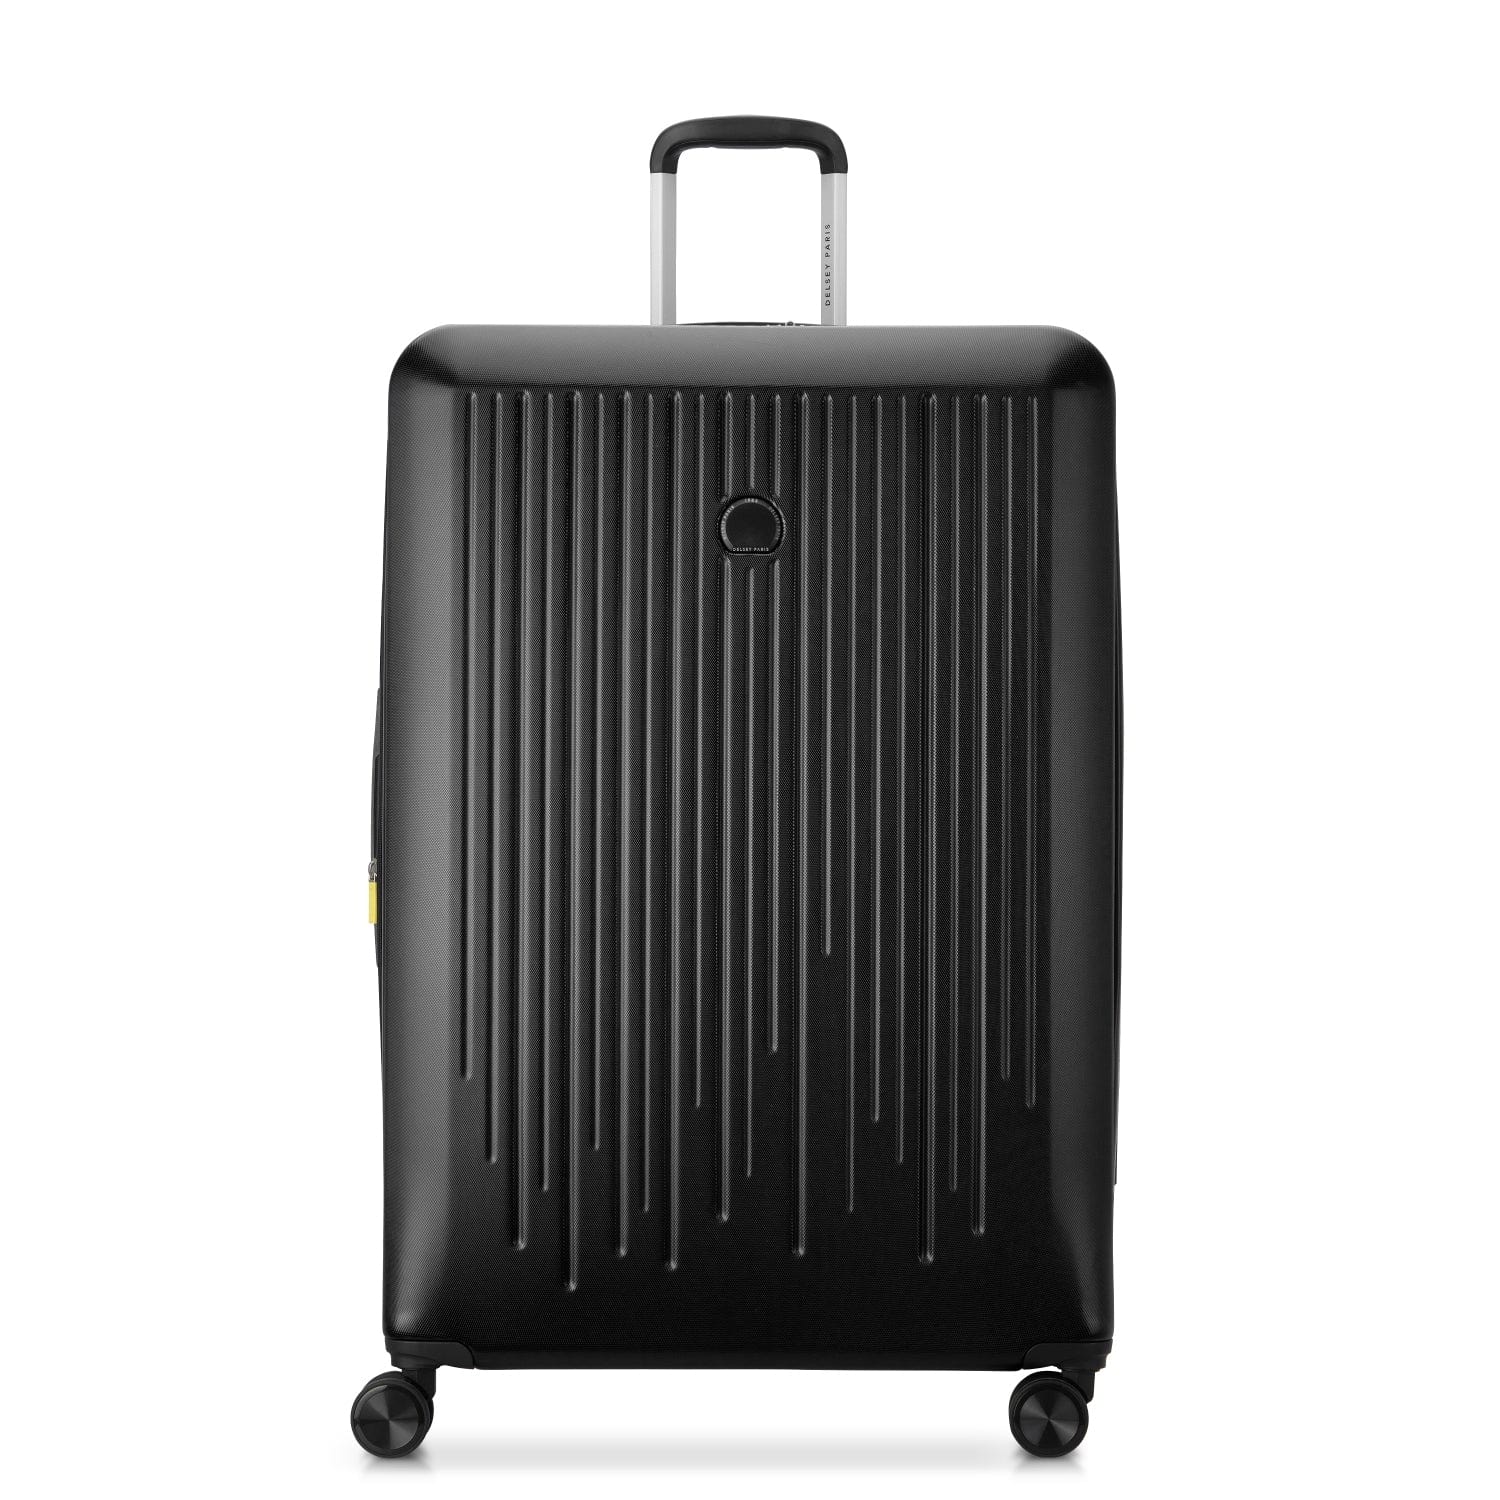 Delsey Christine 55+82cm Hardcase 4 Double Wheel Expandable Cabin & Check-In Luggage Trolley Set Klein Black + FREE Delsey Agreable Backpack